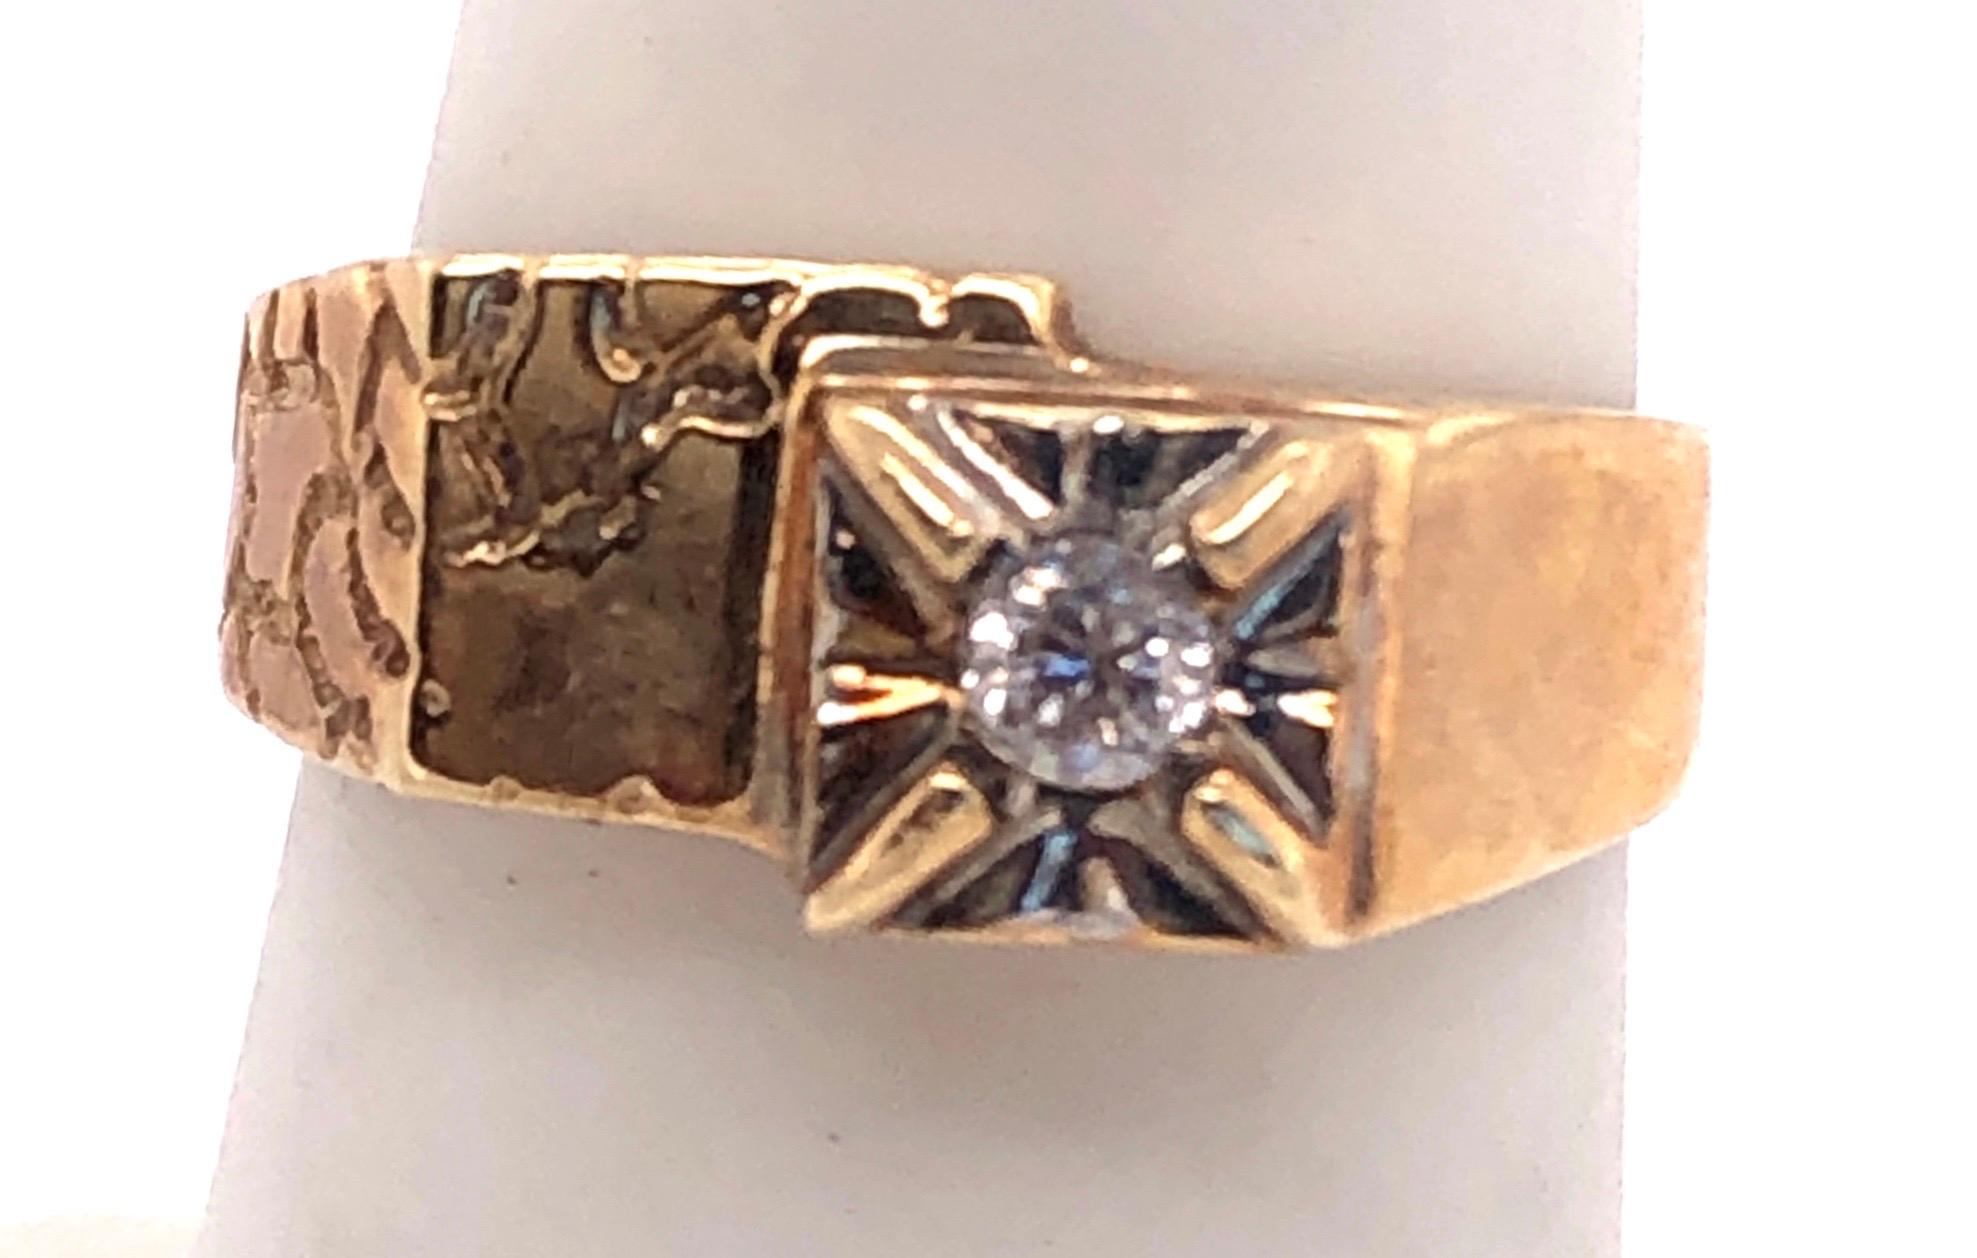 14 Karat Yellow Gold Contemporary Ring with Diamond 0.15 Total Diamond Weight
Size 6.5 
 4 grams total weight